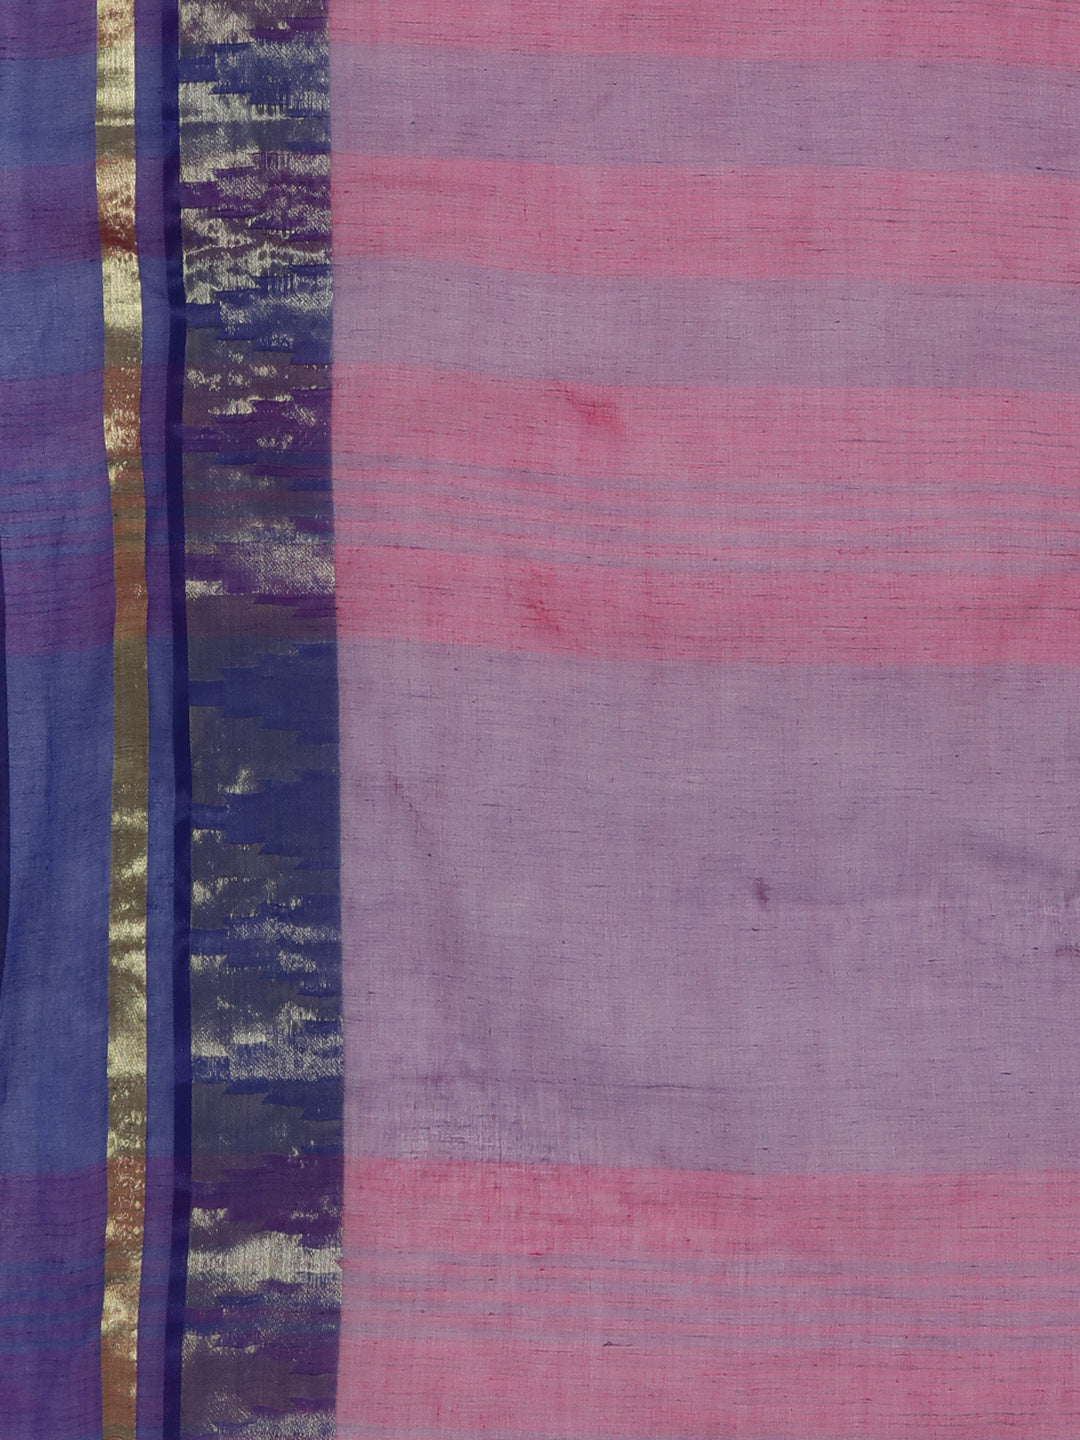 Purple Tant Woven Design Saree Without Blouse Piece DUTASA048 DUTASA048-Saree-Kalakari India-DUTASA048-Geographical Indication, Hand Crafted, Heritage Prints, Natural Dyes, Sarees, Silk Cotton, Sustainable Fabrics, Taant, Tant, West Bengal, Woven-[Linen,Ethnic,wear,Fashionista,Handloom,Handicraft,Indigo,blockprint,block,print,Cotton,Chanderi,Blue, latest,classy,party,bollywood,trendy,summer,style,traditional,formal,elegant,unique,style,hand,block,print, dabu,booti,gift,present,glamorous,affordab